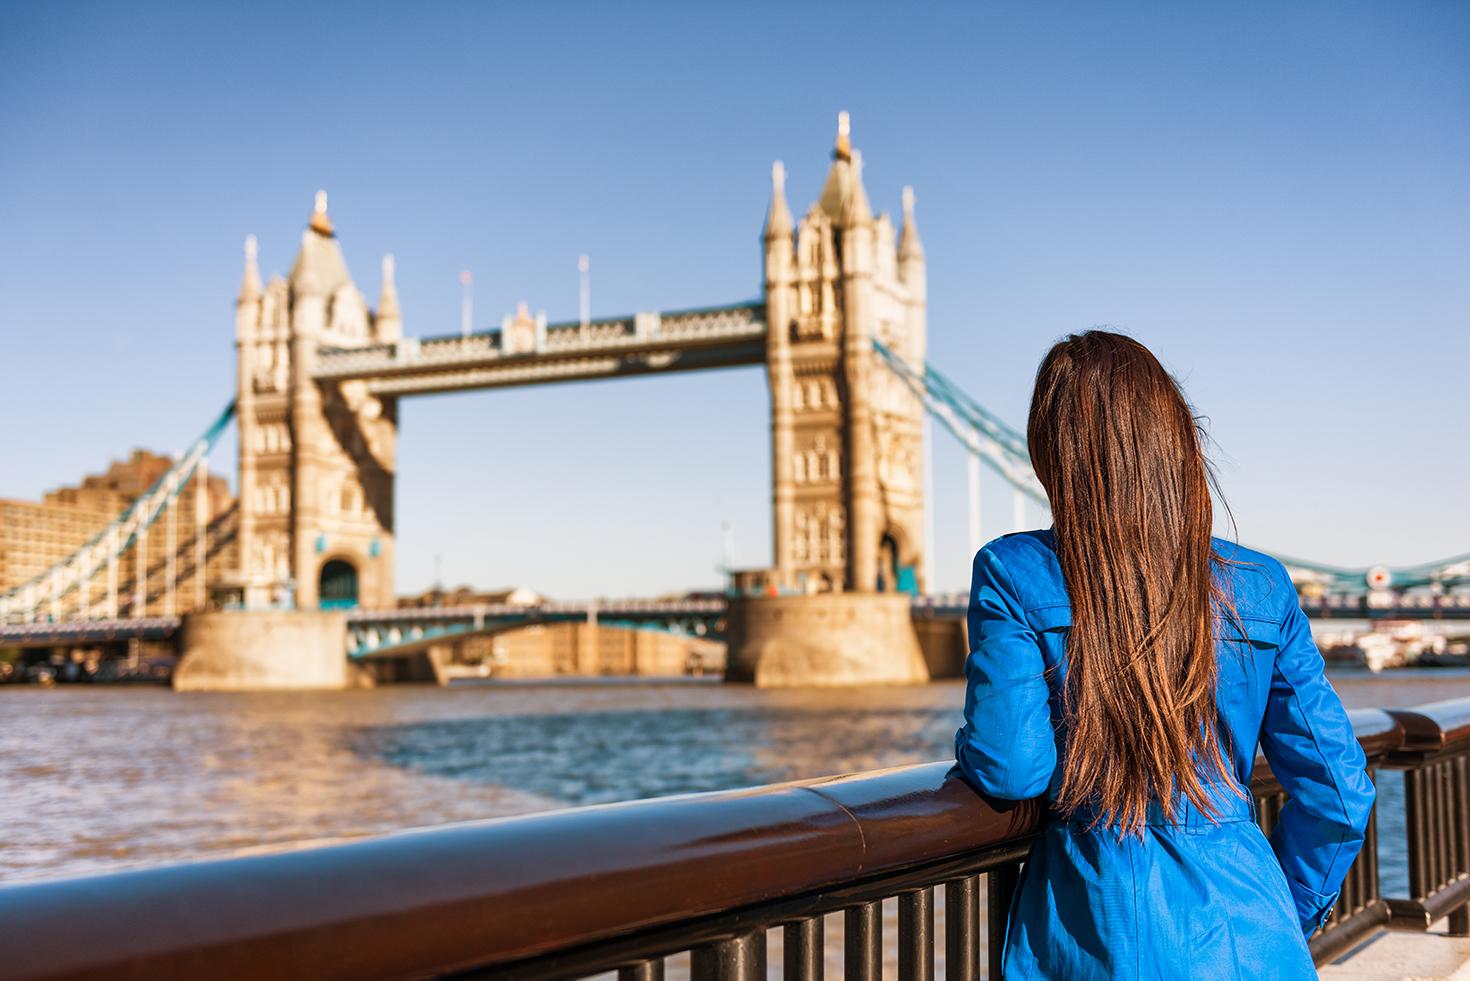 Stroll by classic sights like the London Bridge with England tours and excursions